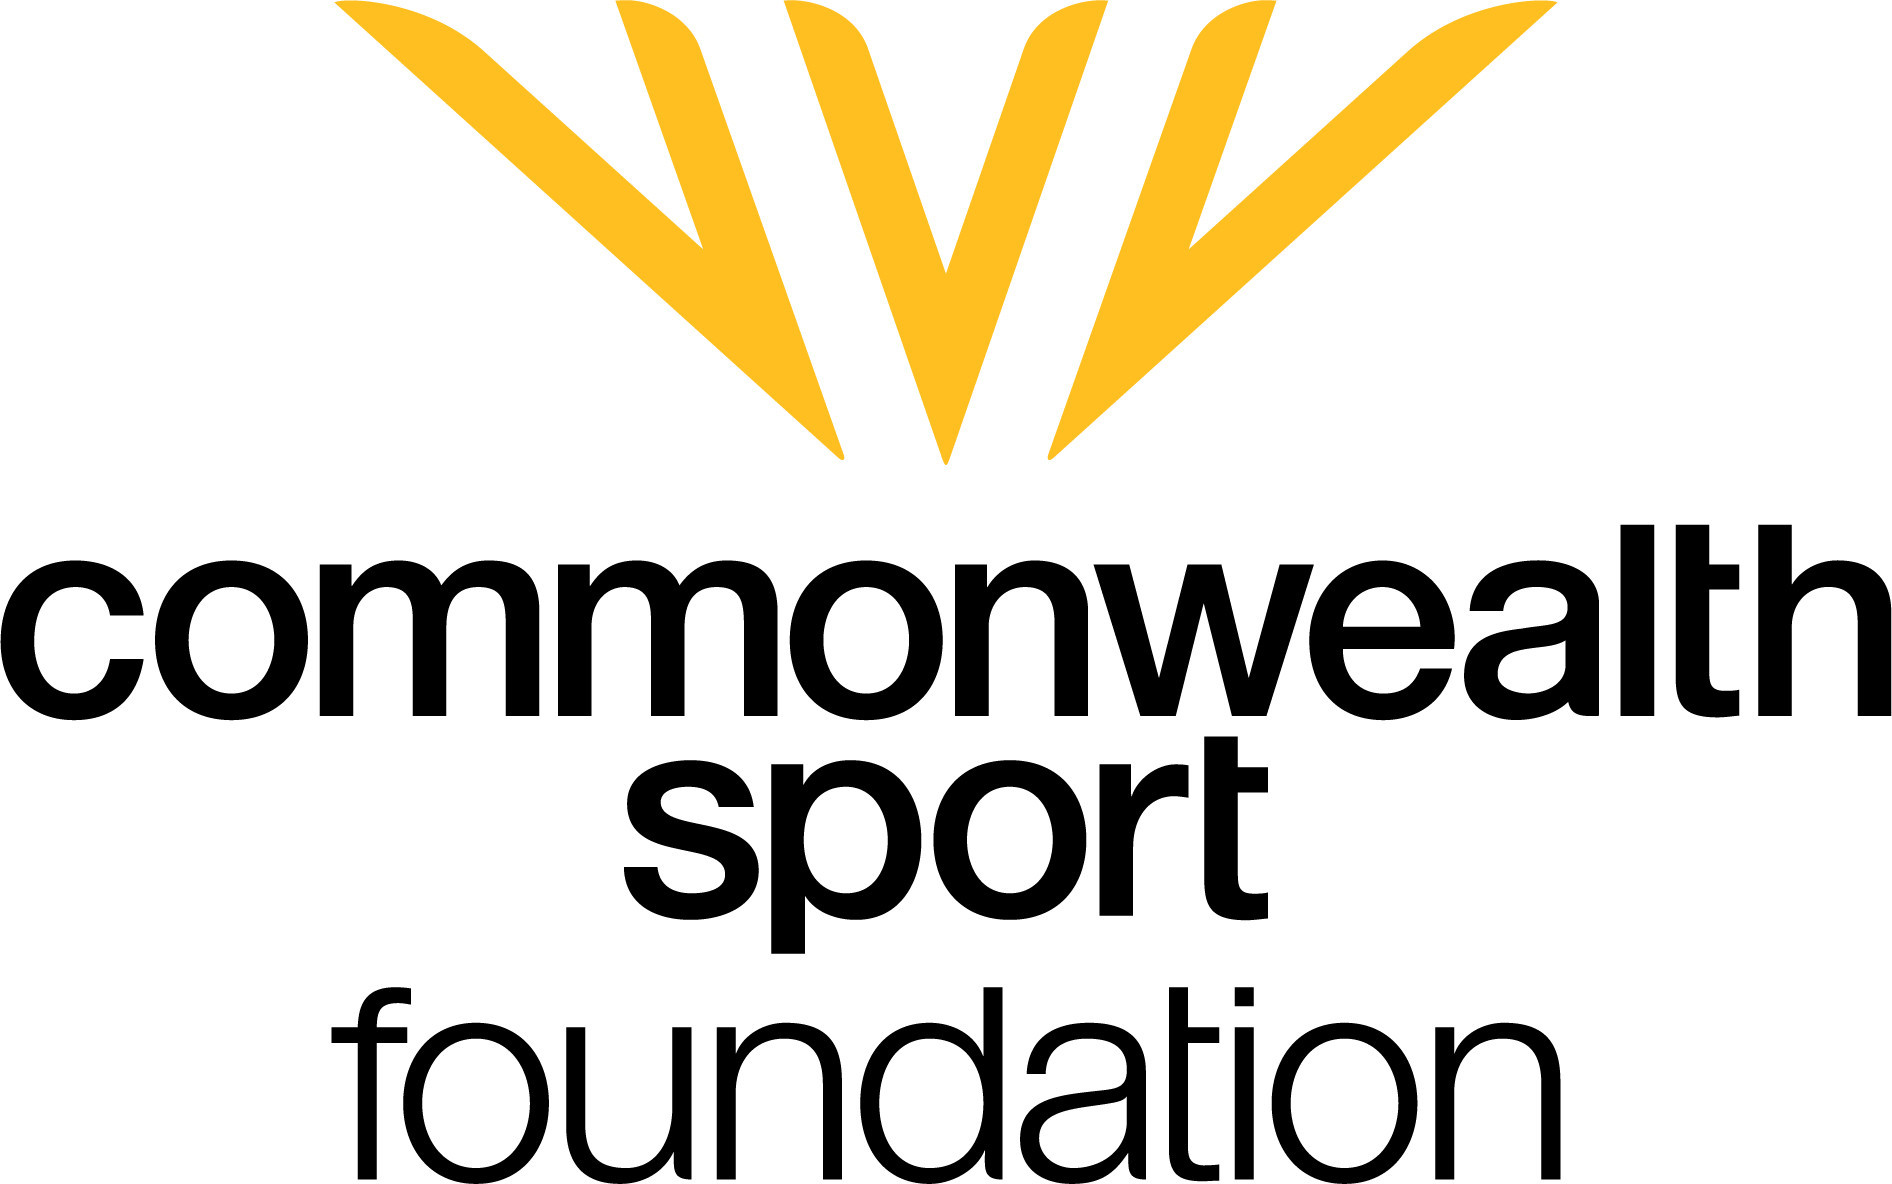 CGF launches new charity Commonwealth Sport Foundation